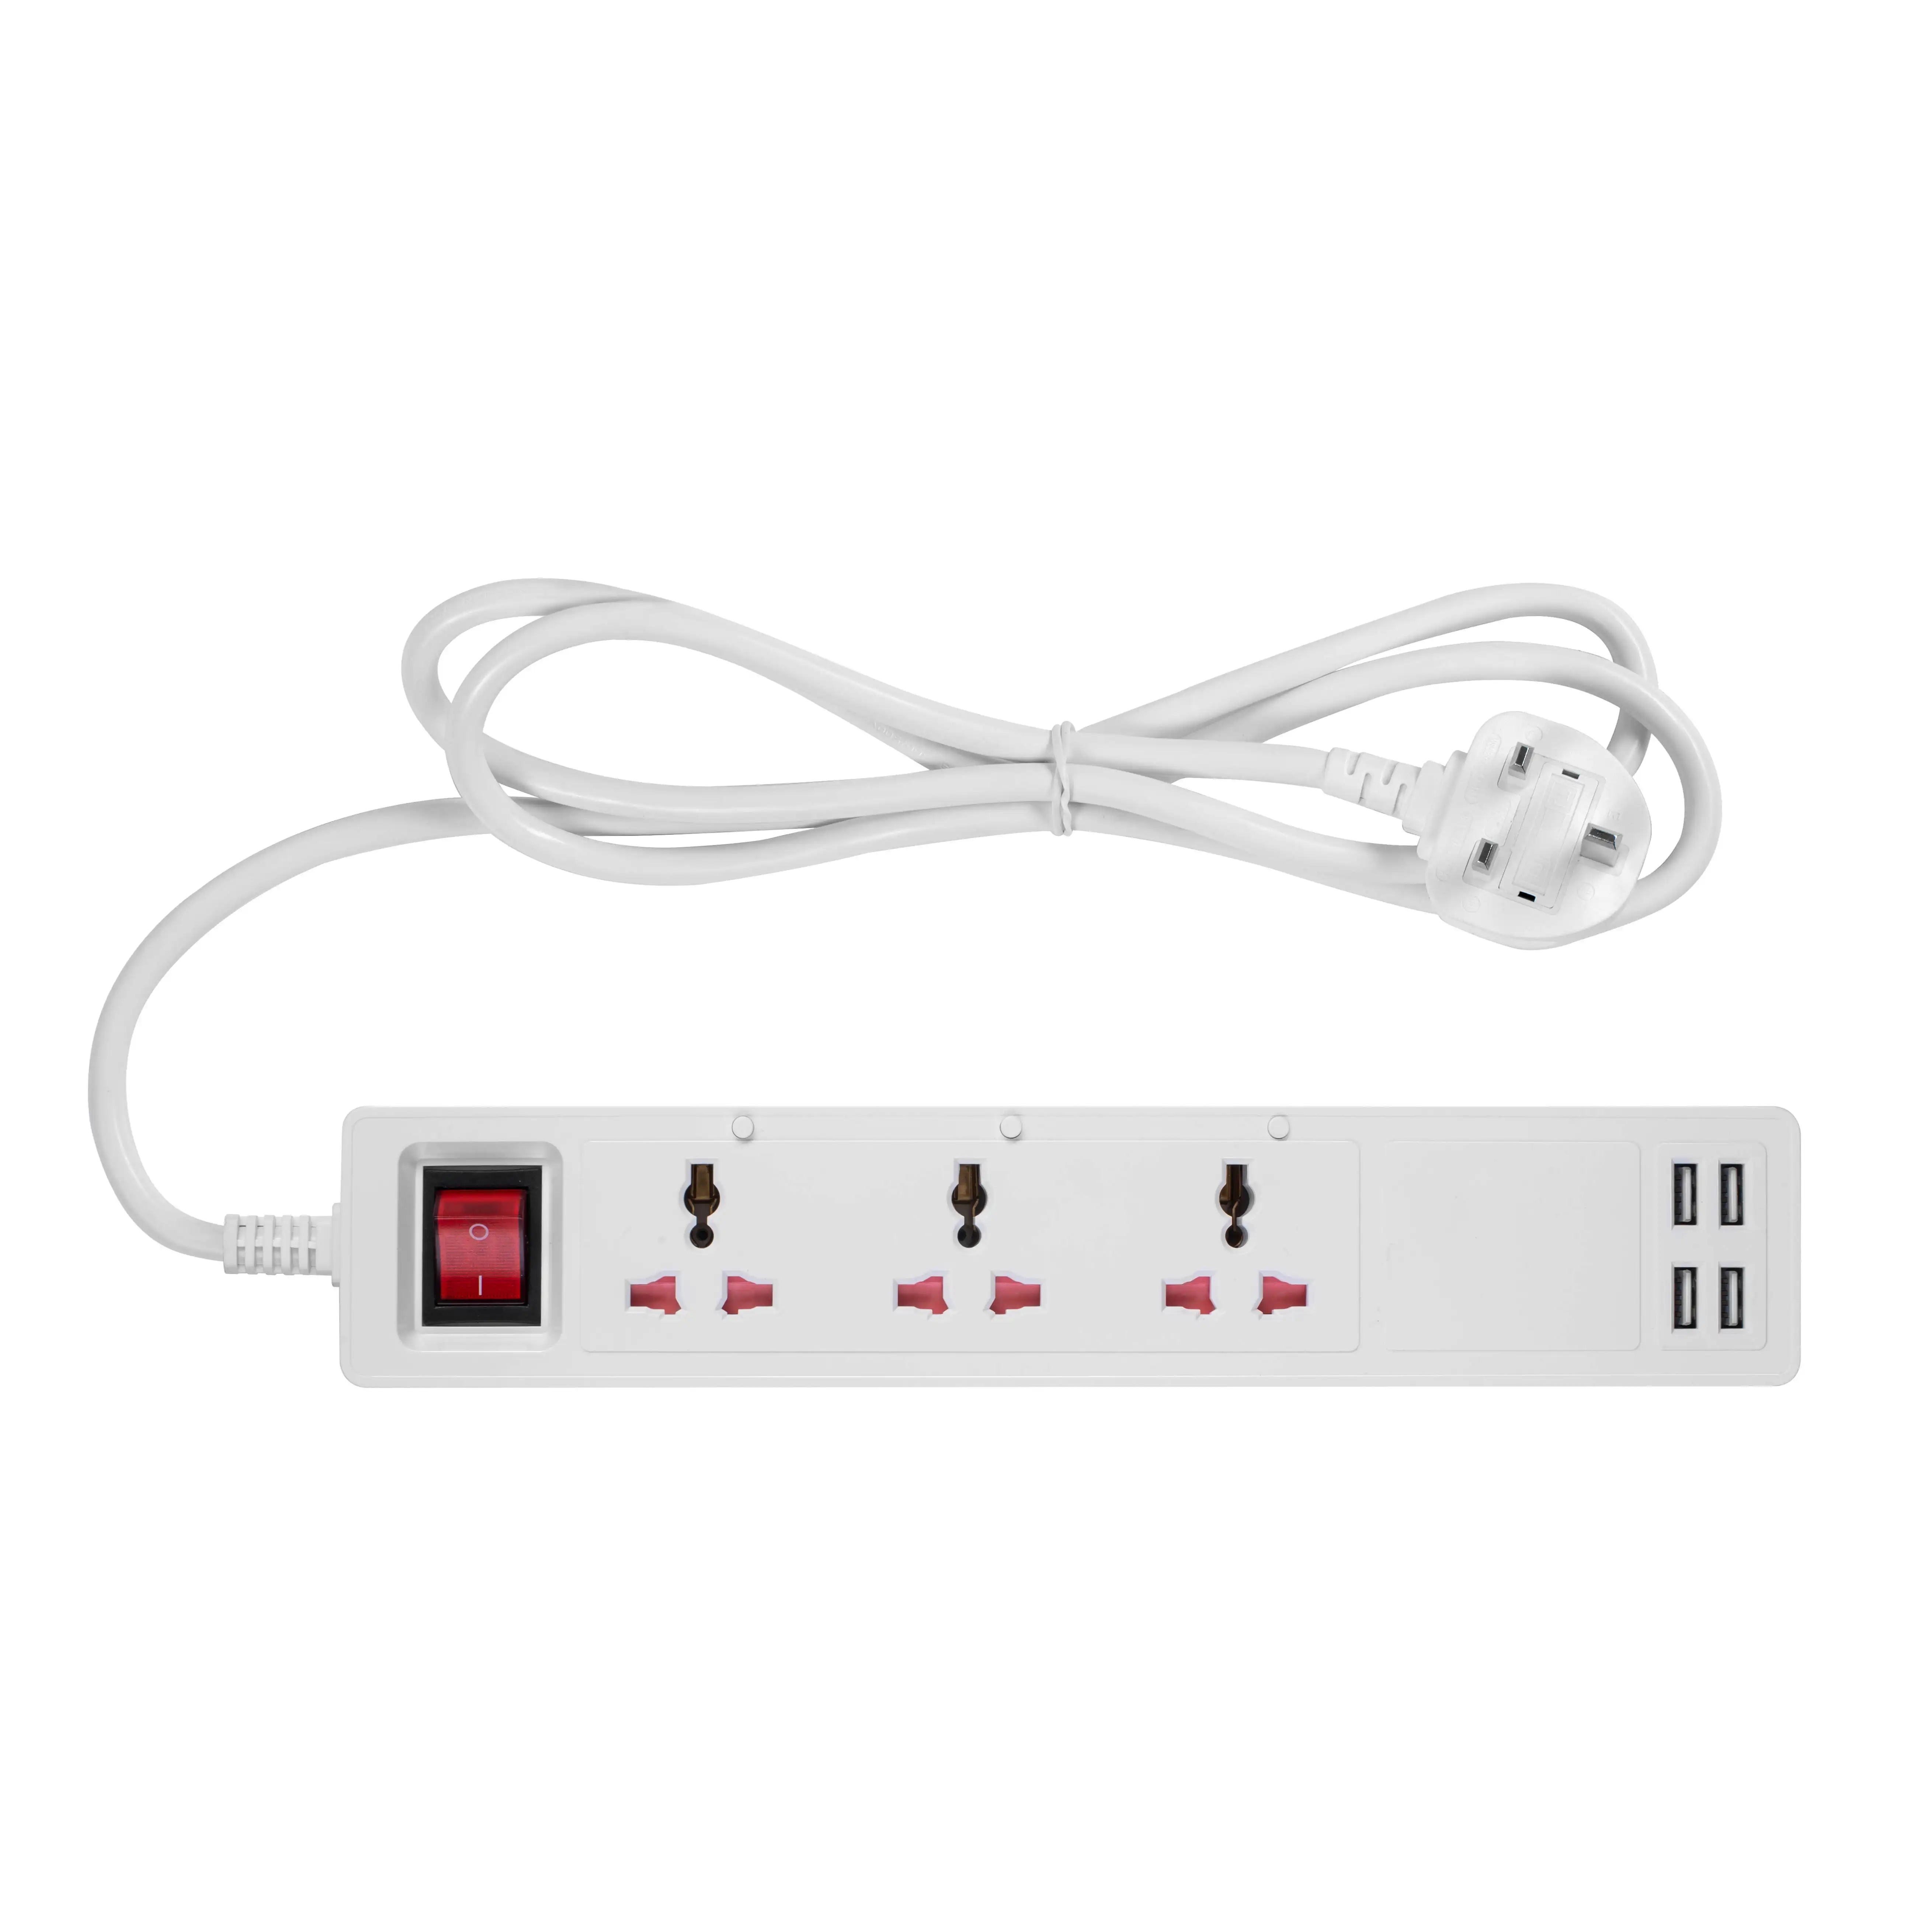 Super September Universal Power Strip Surge Protector Extension Socket Standby Off Outlet with plug